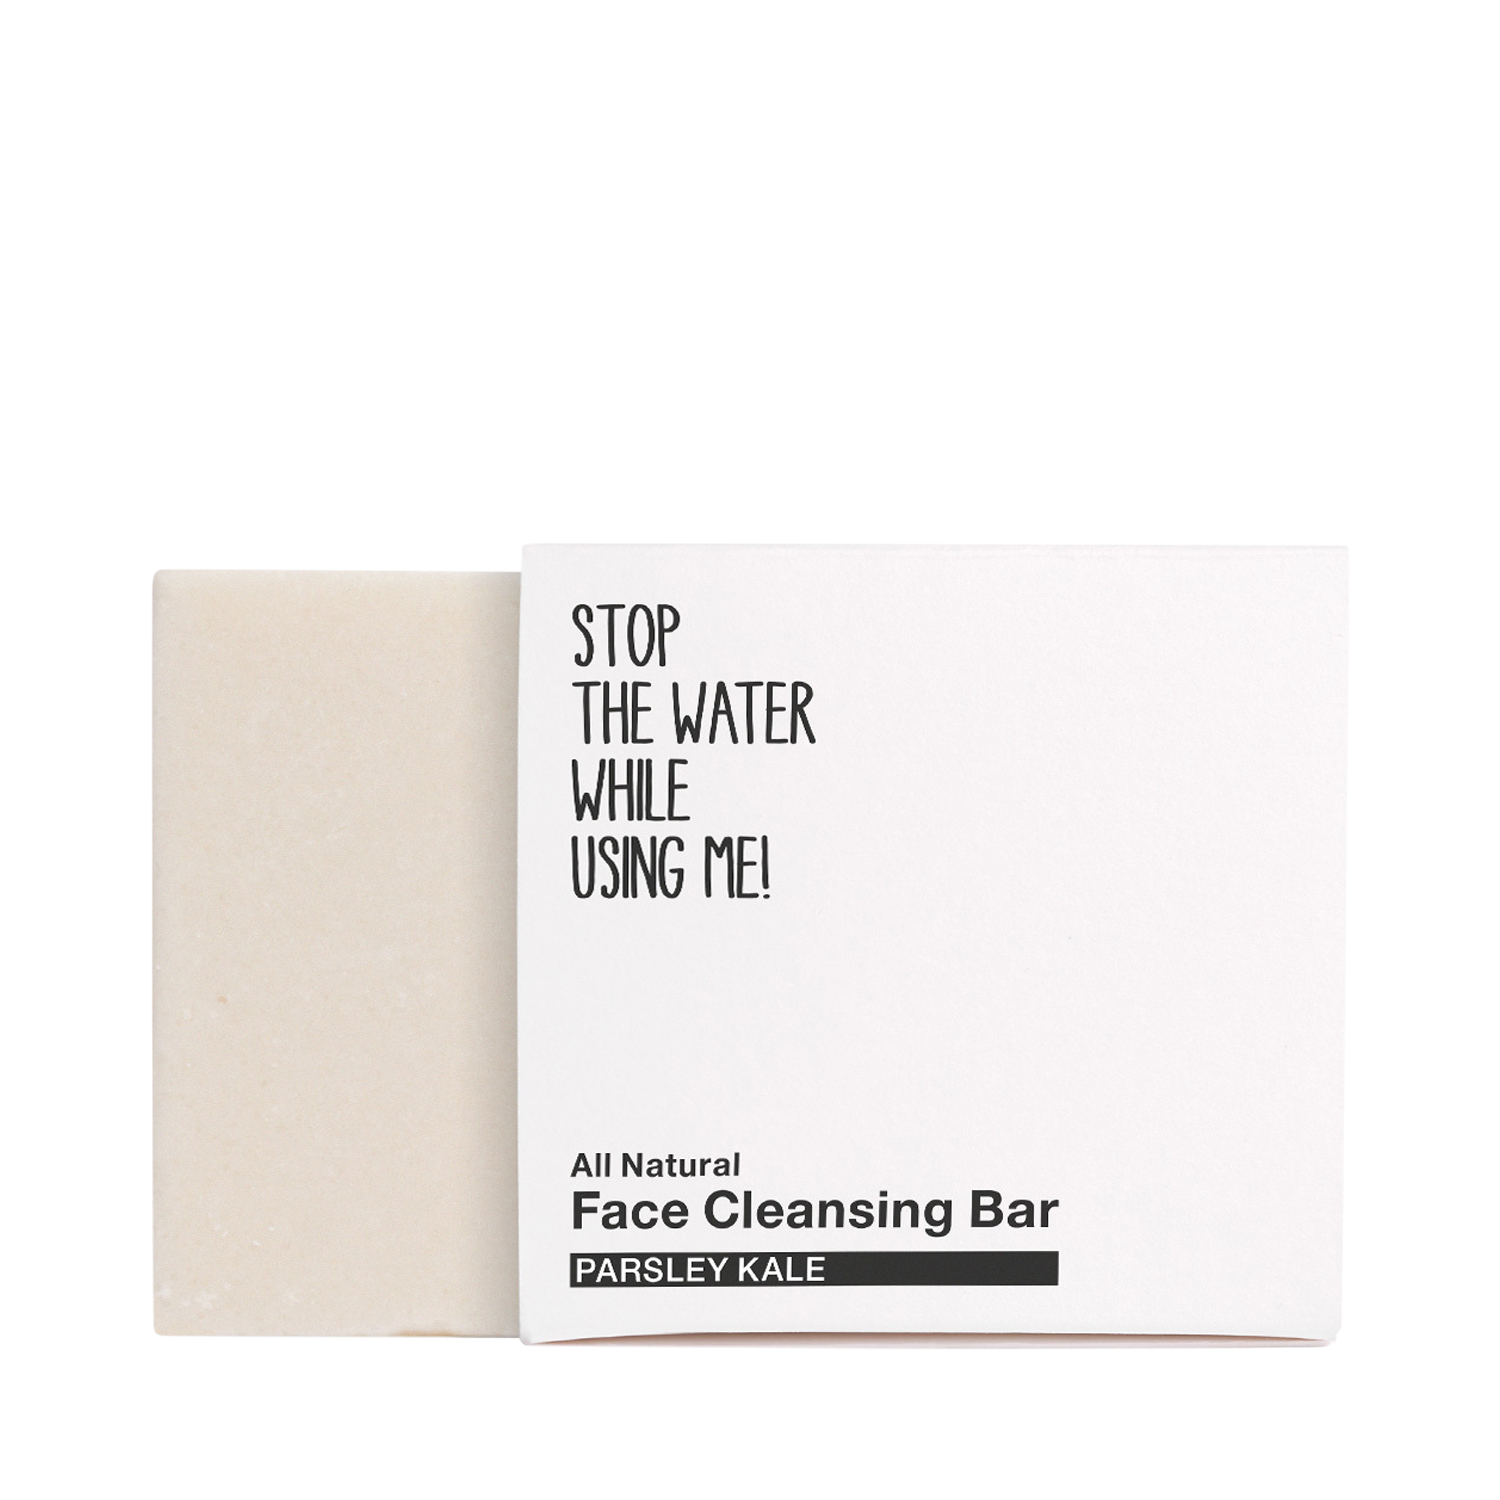 Stop The Water While Using Me! - All Natural Parsley Kale Face Cleansing Bar - Gesichtsreiniger